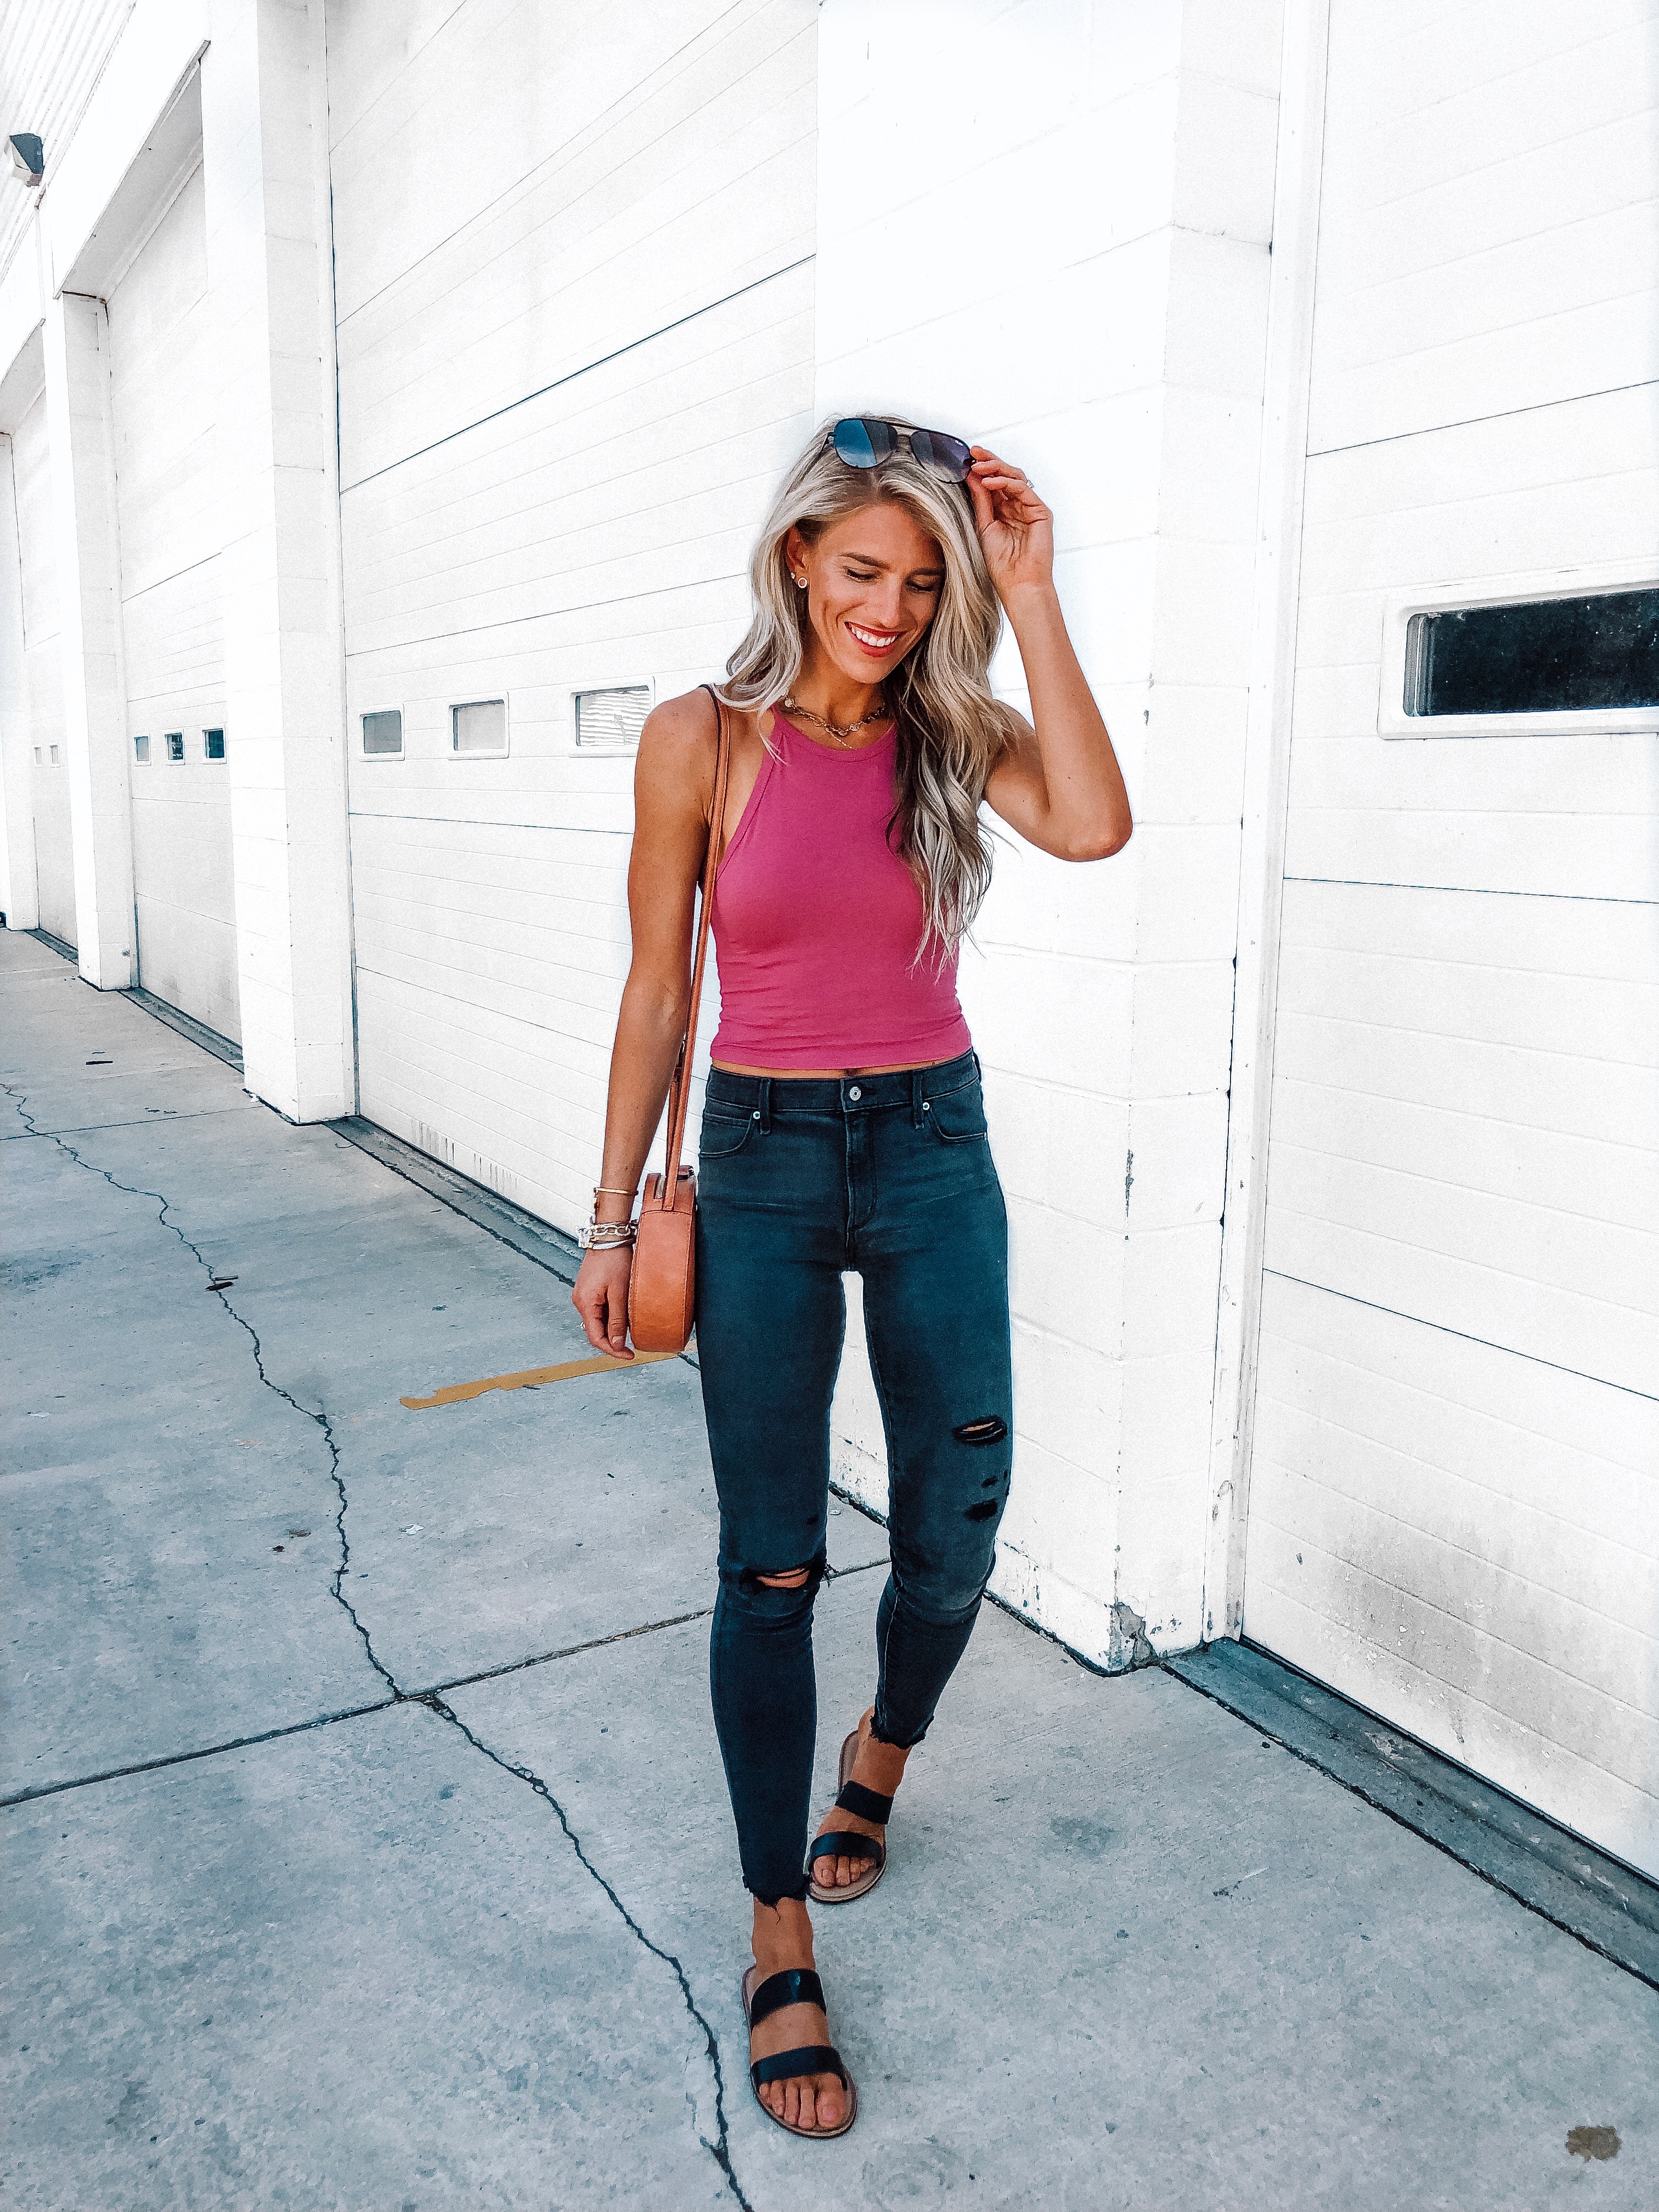 Tall Blonde Bell - Fashion + Lifestyle by Ashley Bell @tallblondebell.com #abercrombiestyle